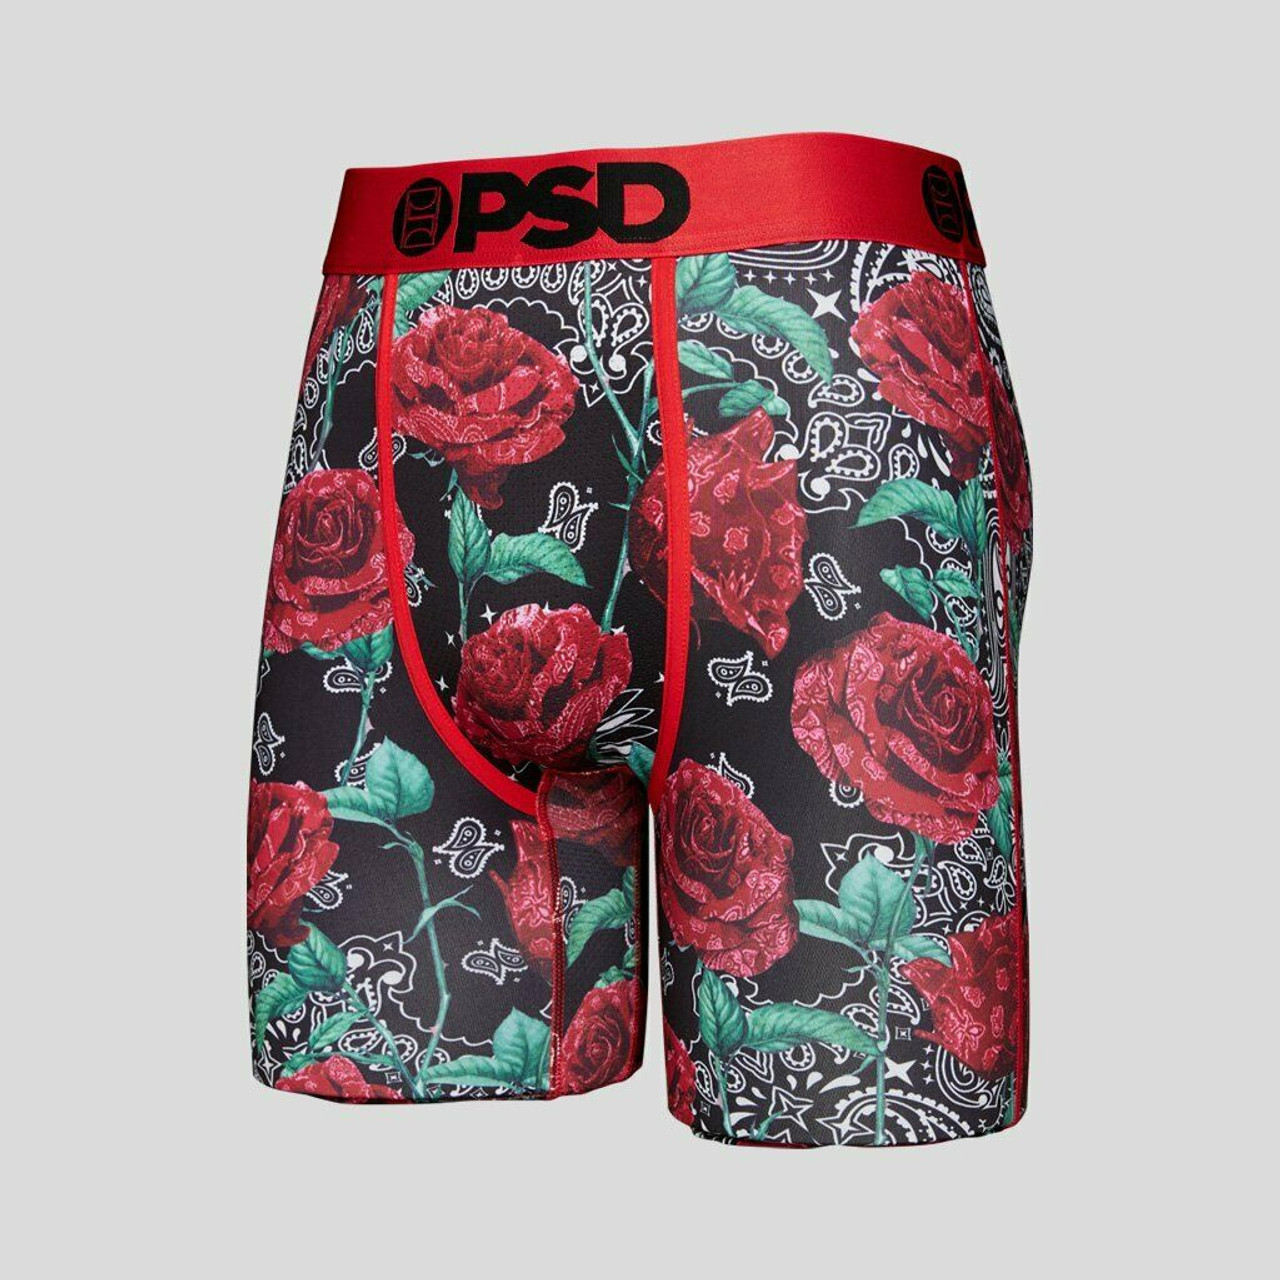 PSD Bandana Roses Western Floral Boxers Briefs Mens Athletic Underwear ...